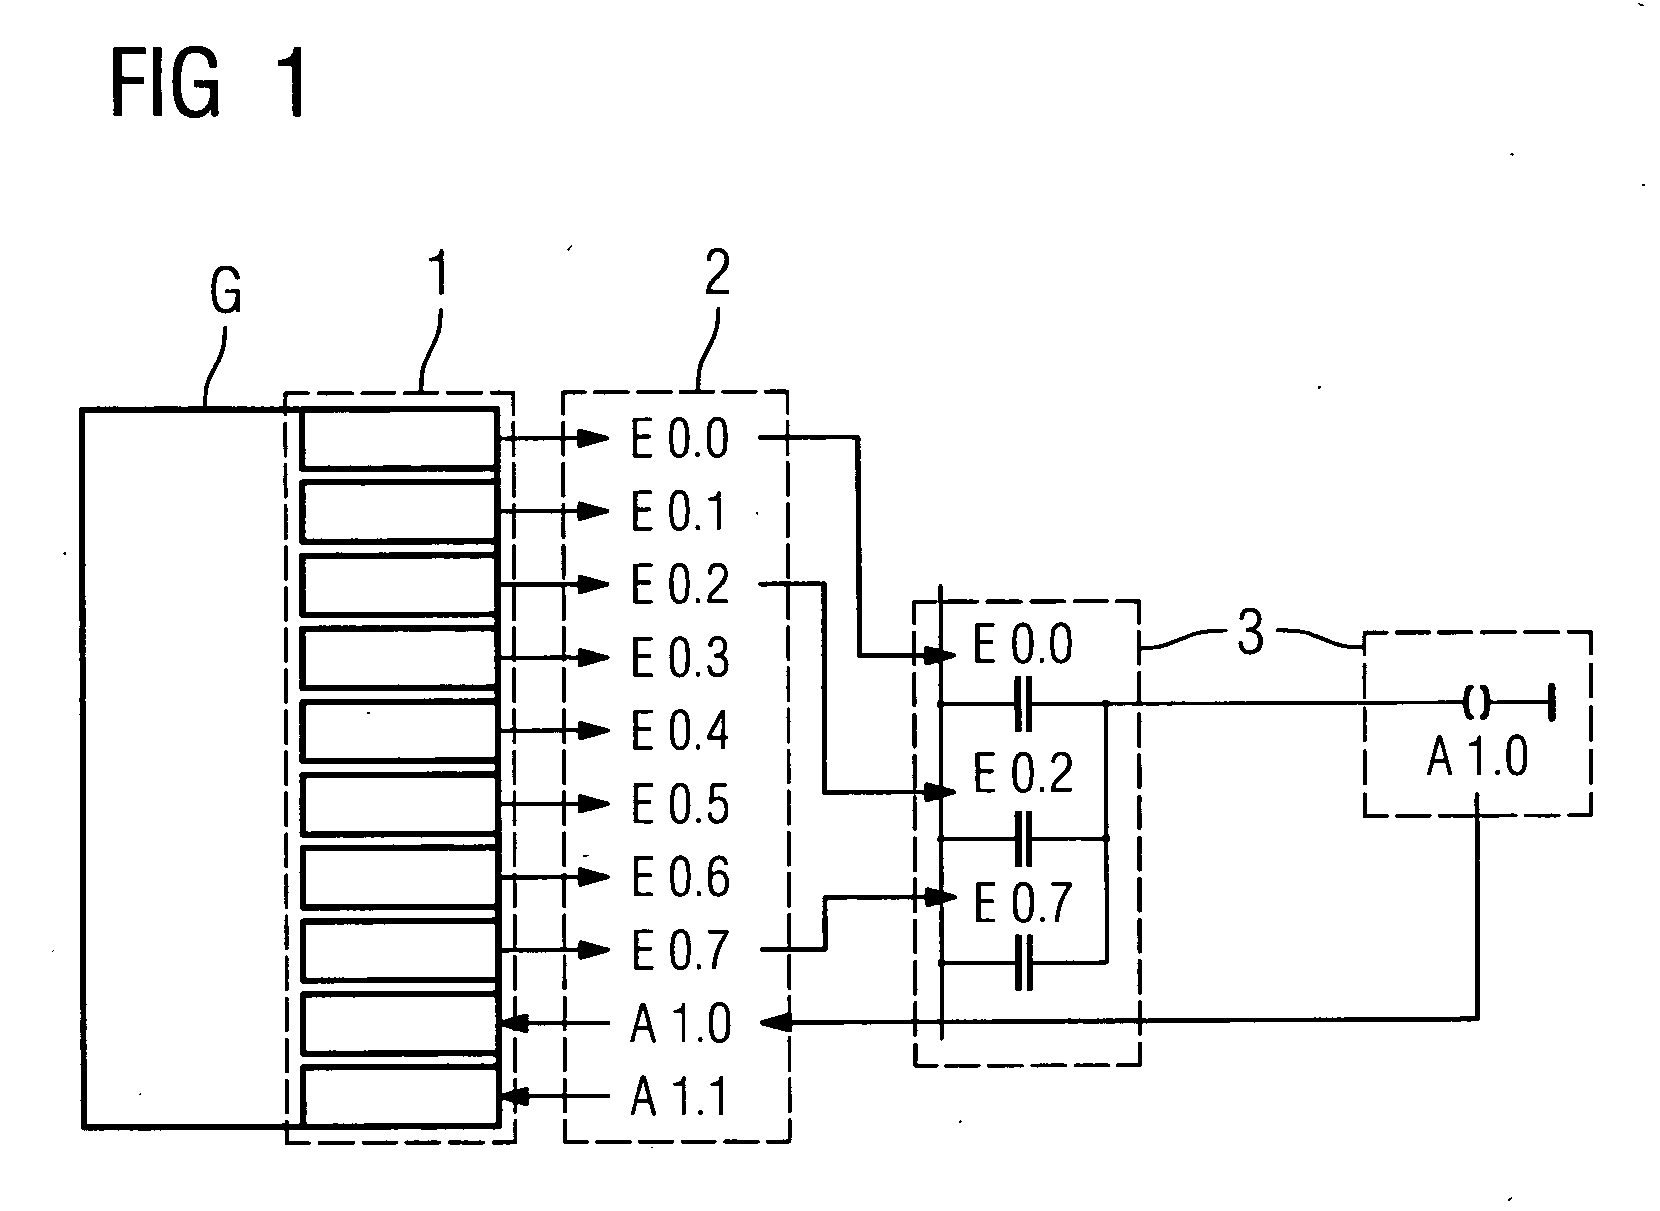 Graphical interconnection of hardware signals